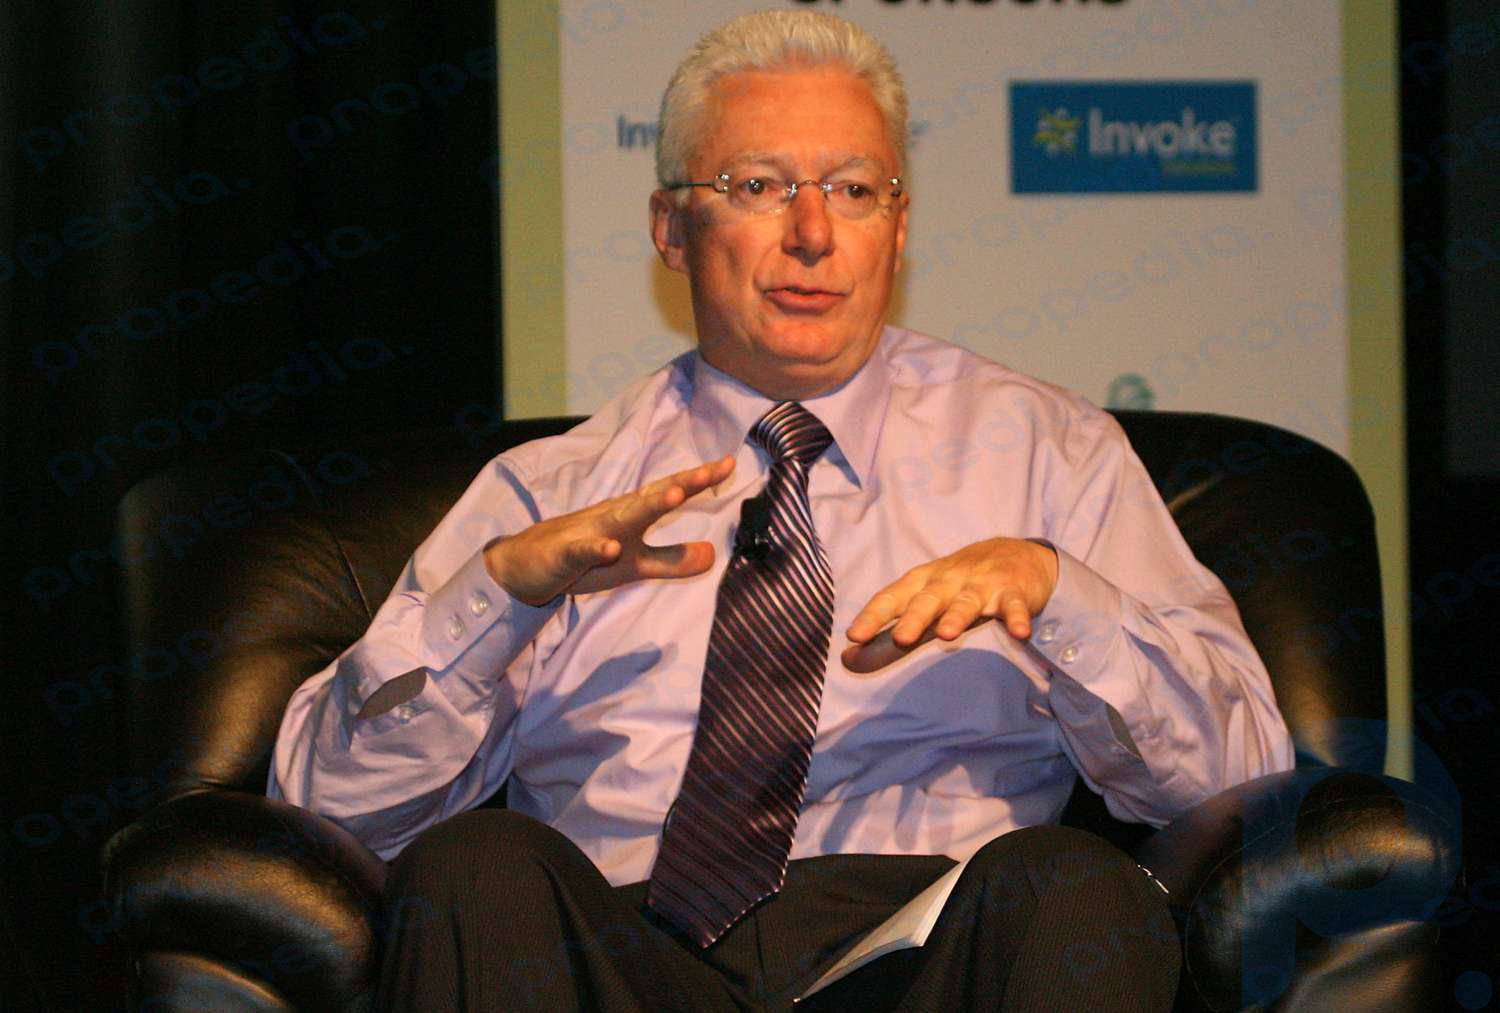 A.G. Lafley speaks at the International Institute of Research Front End of Innovation Conference in Boston in 2008.